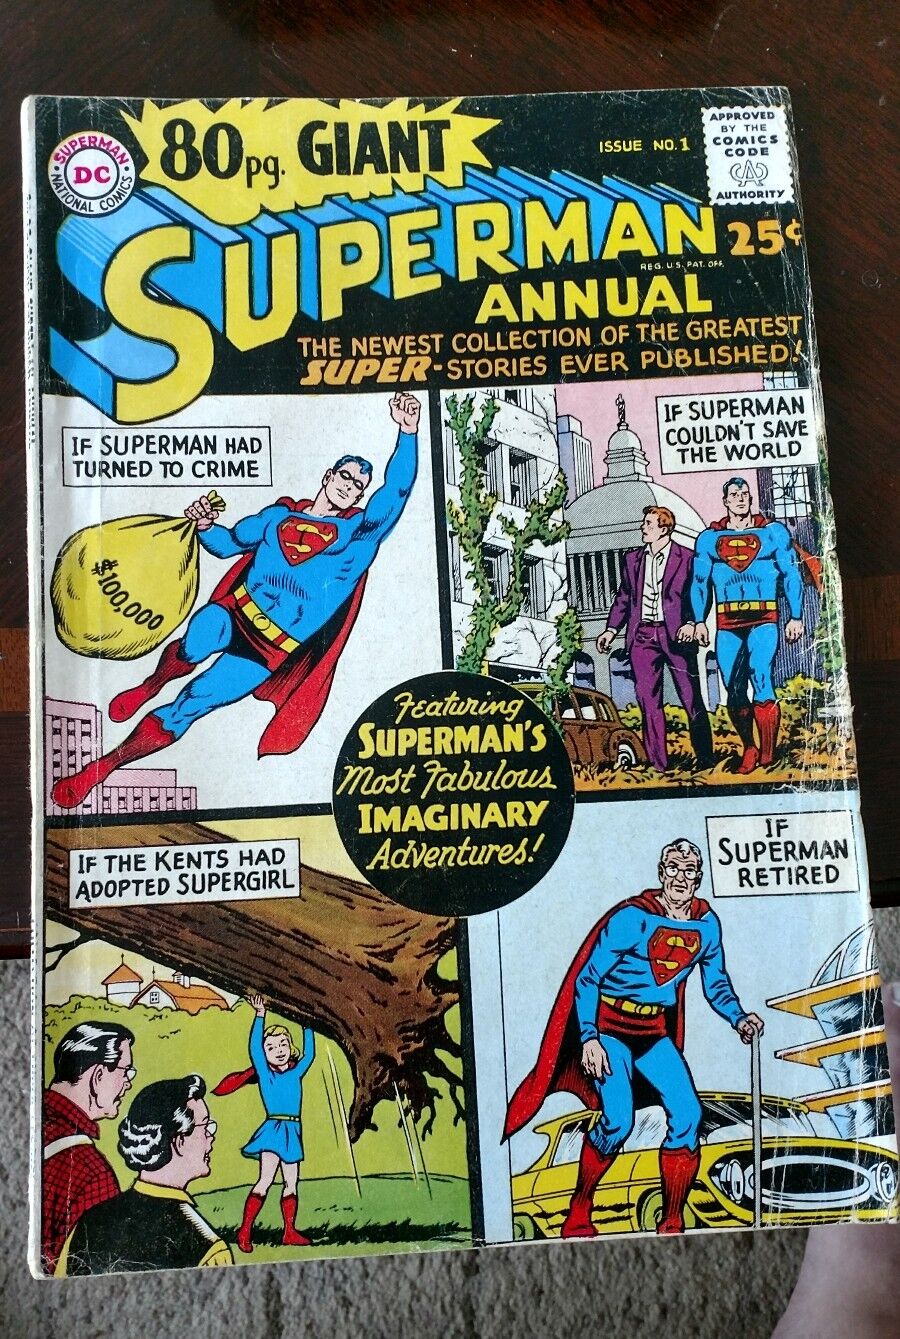 80 Page Giant Superman Annual #1 VG 3.5 Superman Vs Superboy